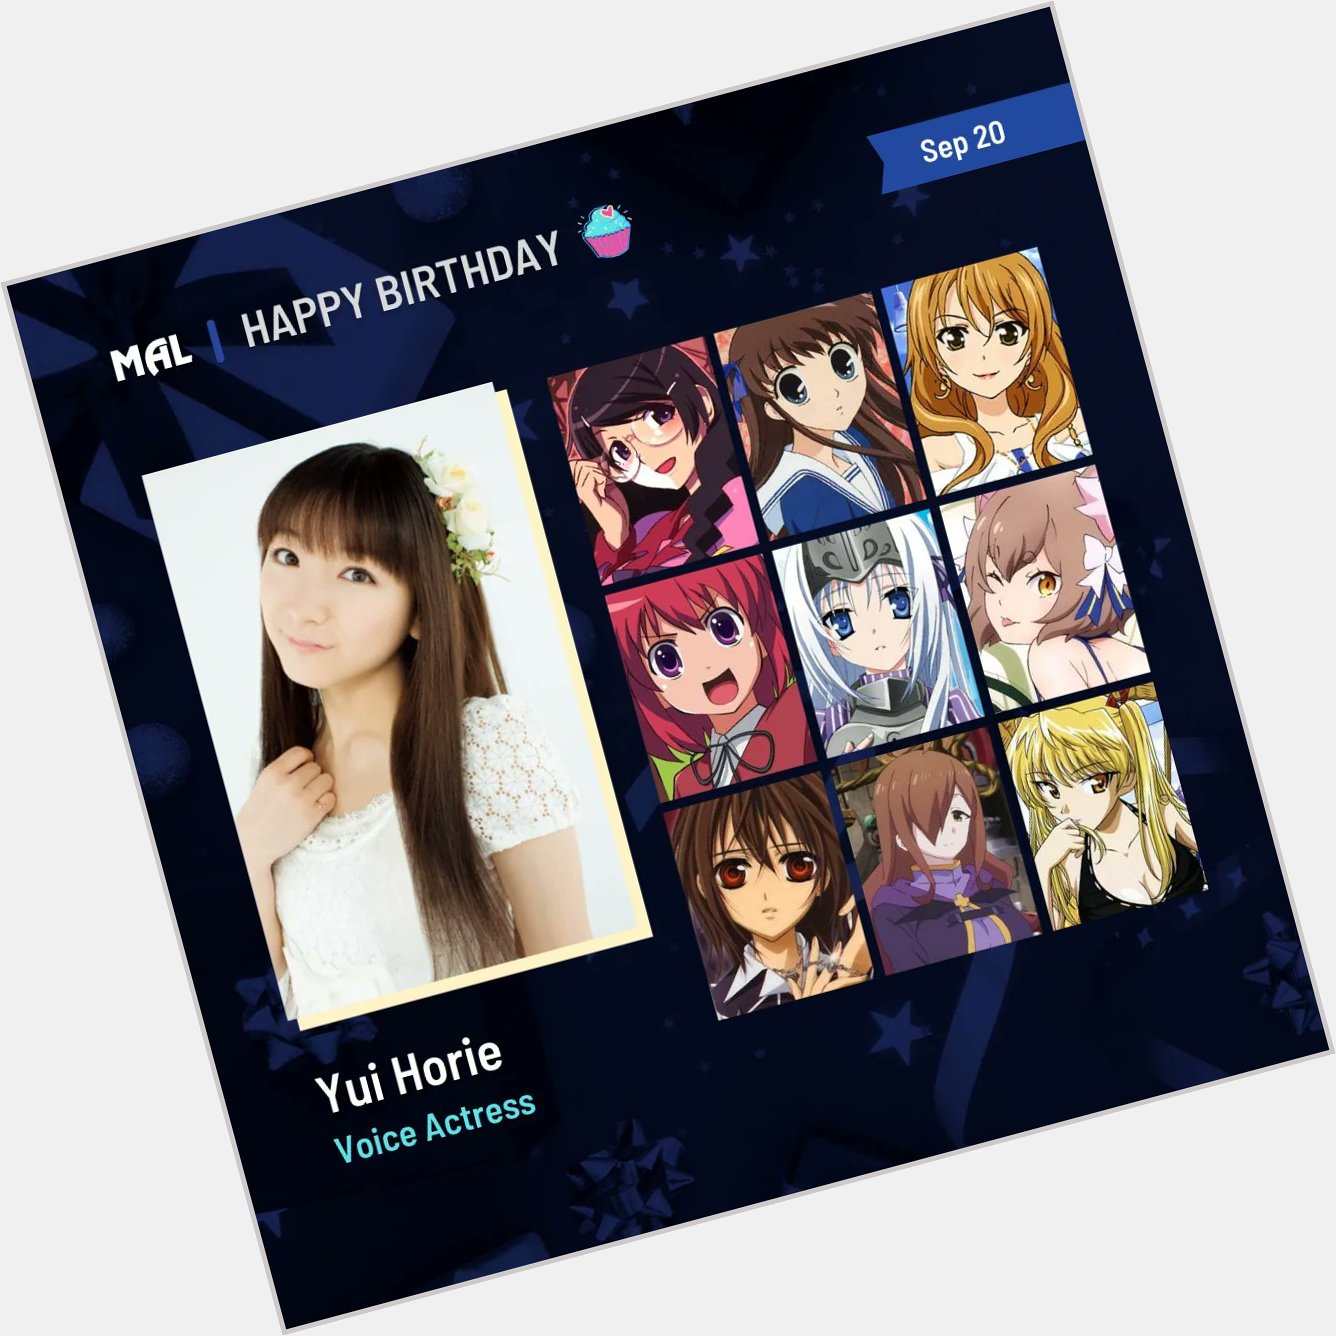 Happy birthday to Yui Horie! Full profile:  